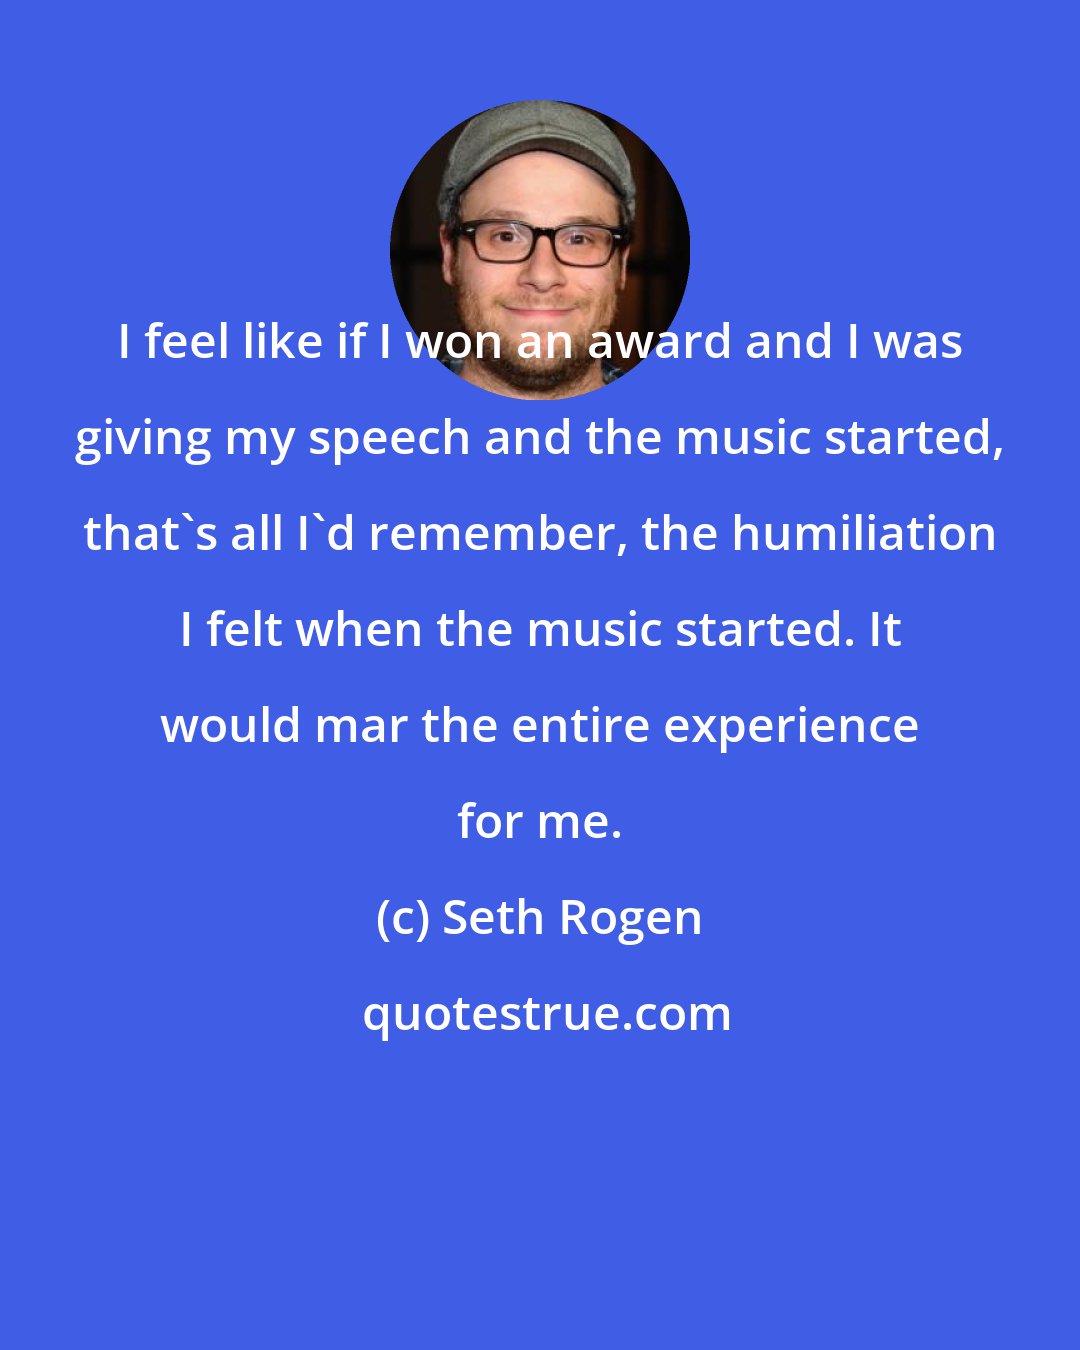 Seth Rogen: I feel like if I won an award and I was giving my speech and the music started, that's all I'd remember, the humiliation I felt when the music started. It would mar the entire experience for me.